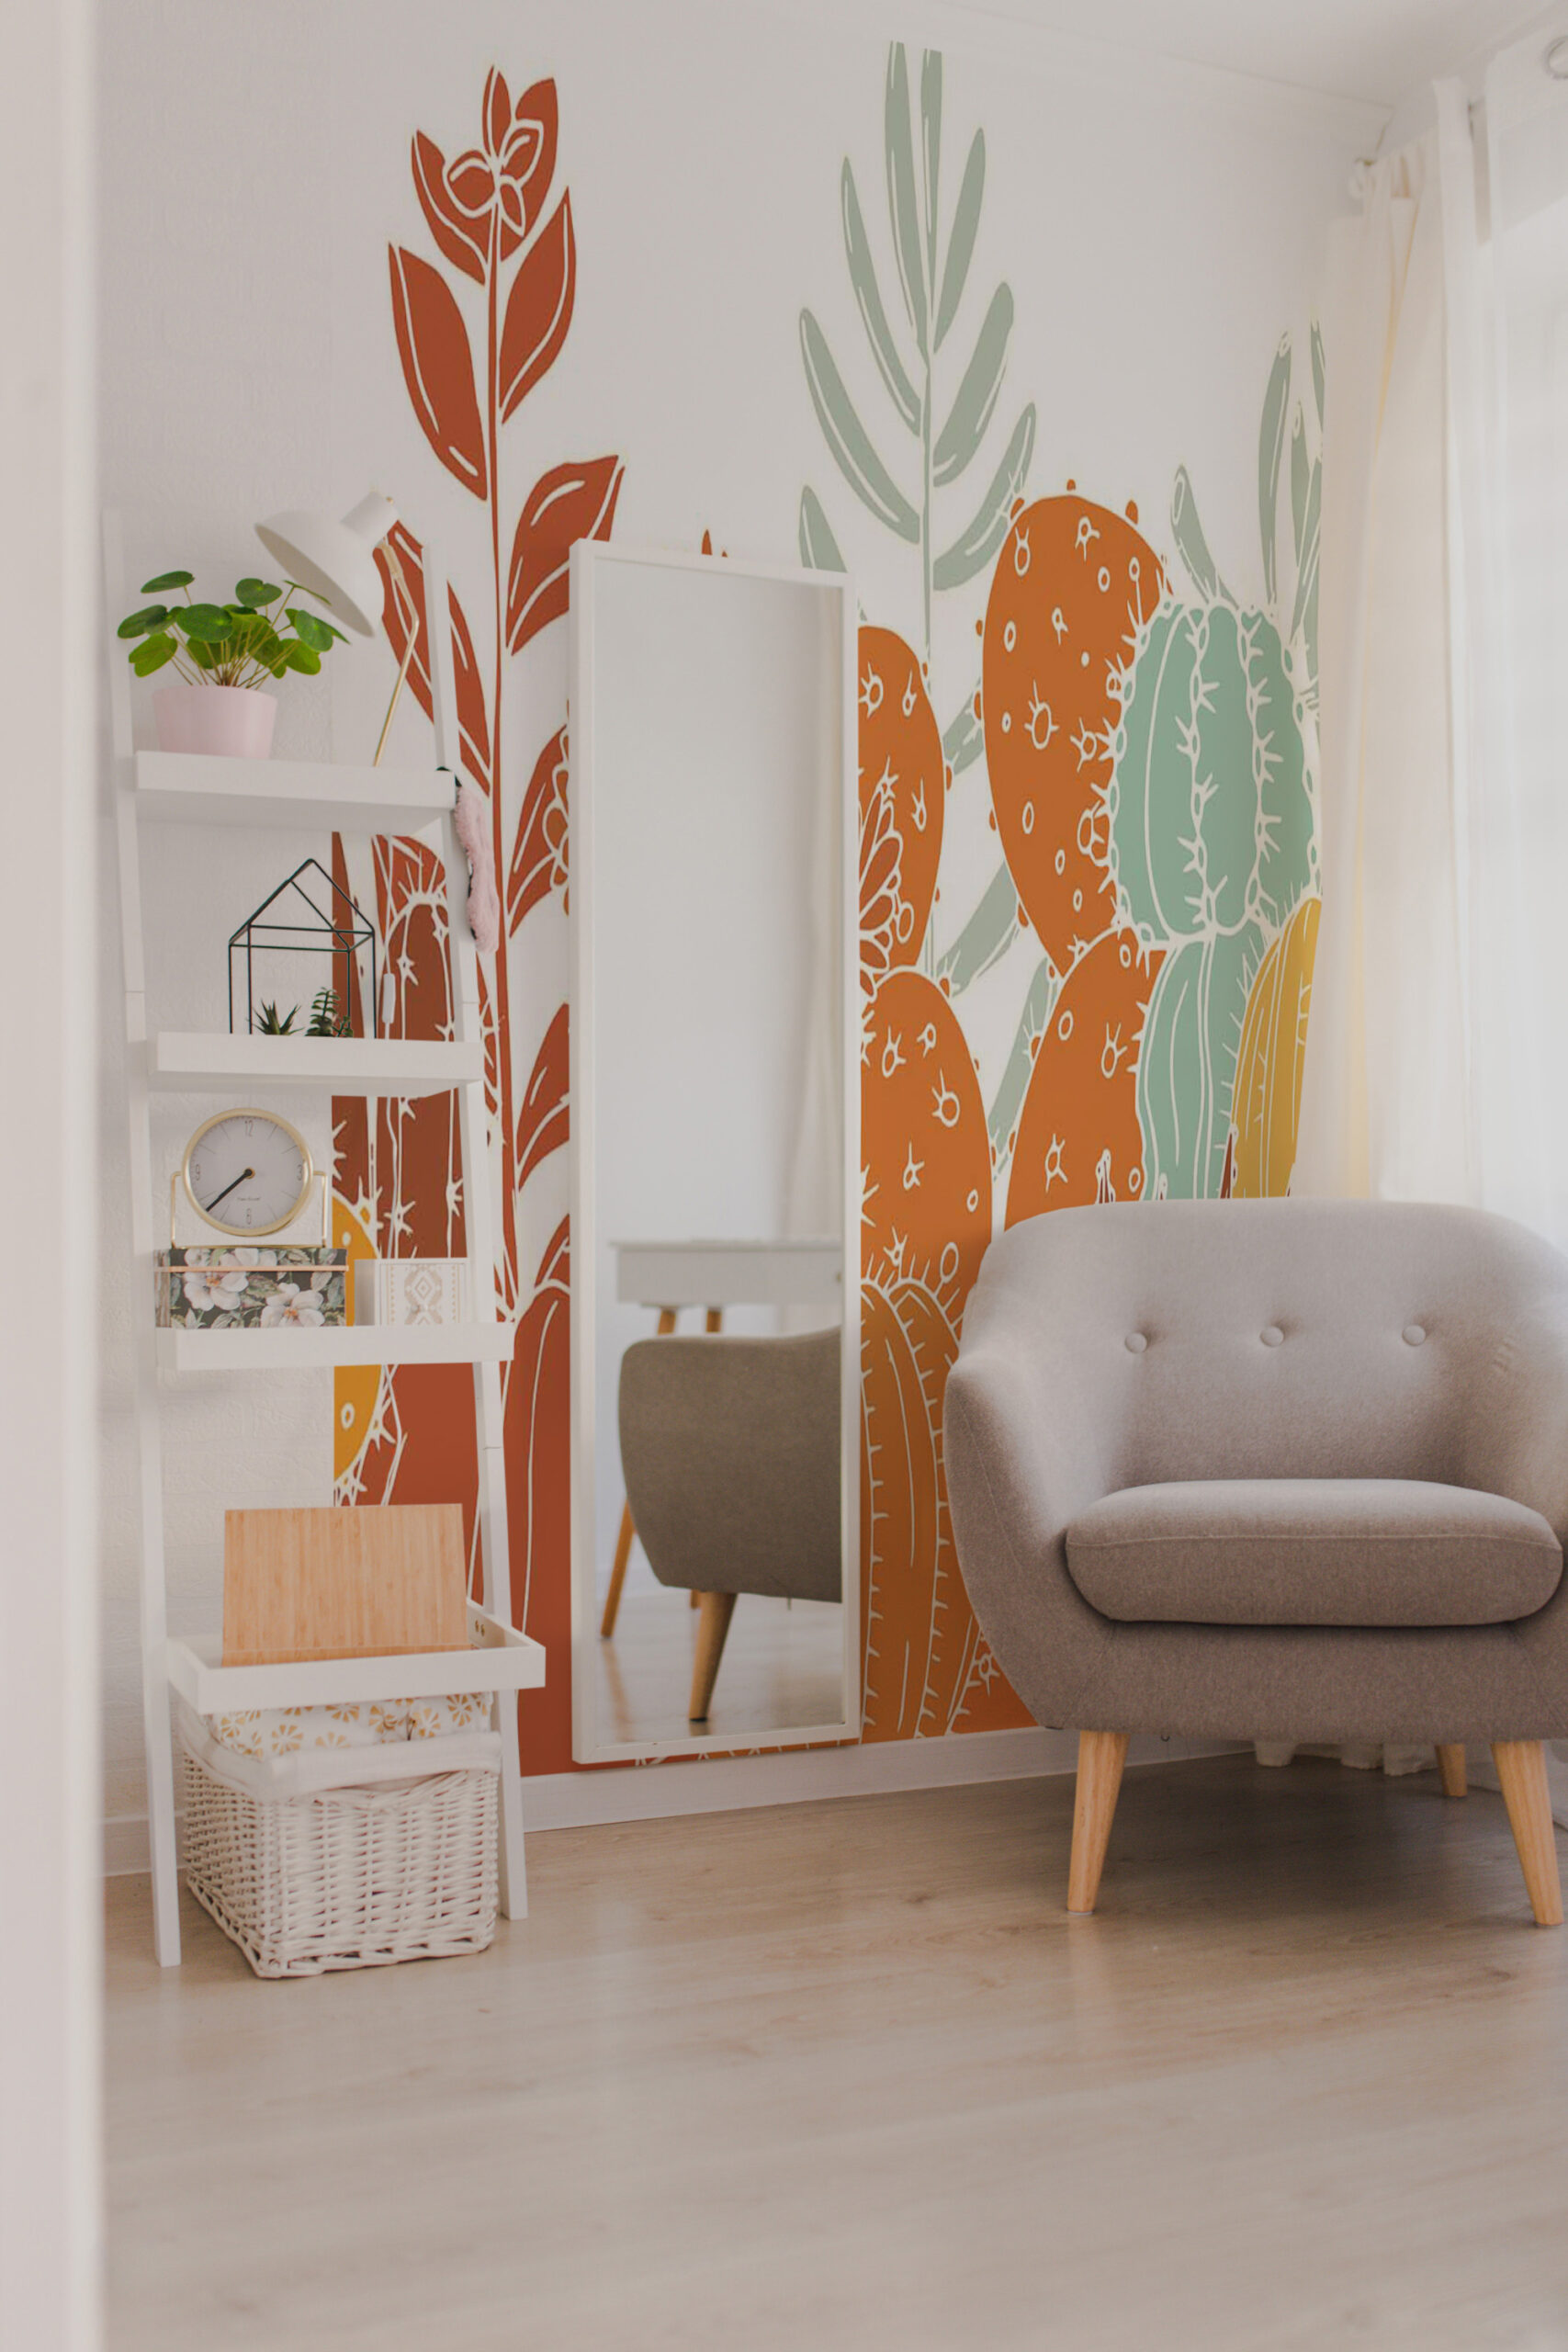 Living room transformation with Fancy Walls - mural for wall